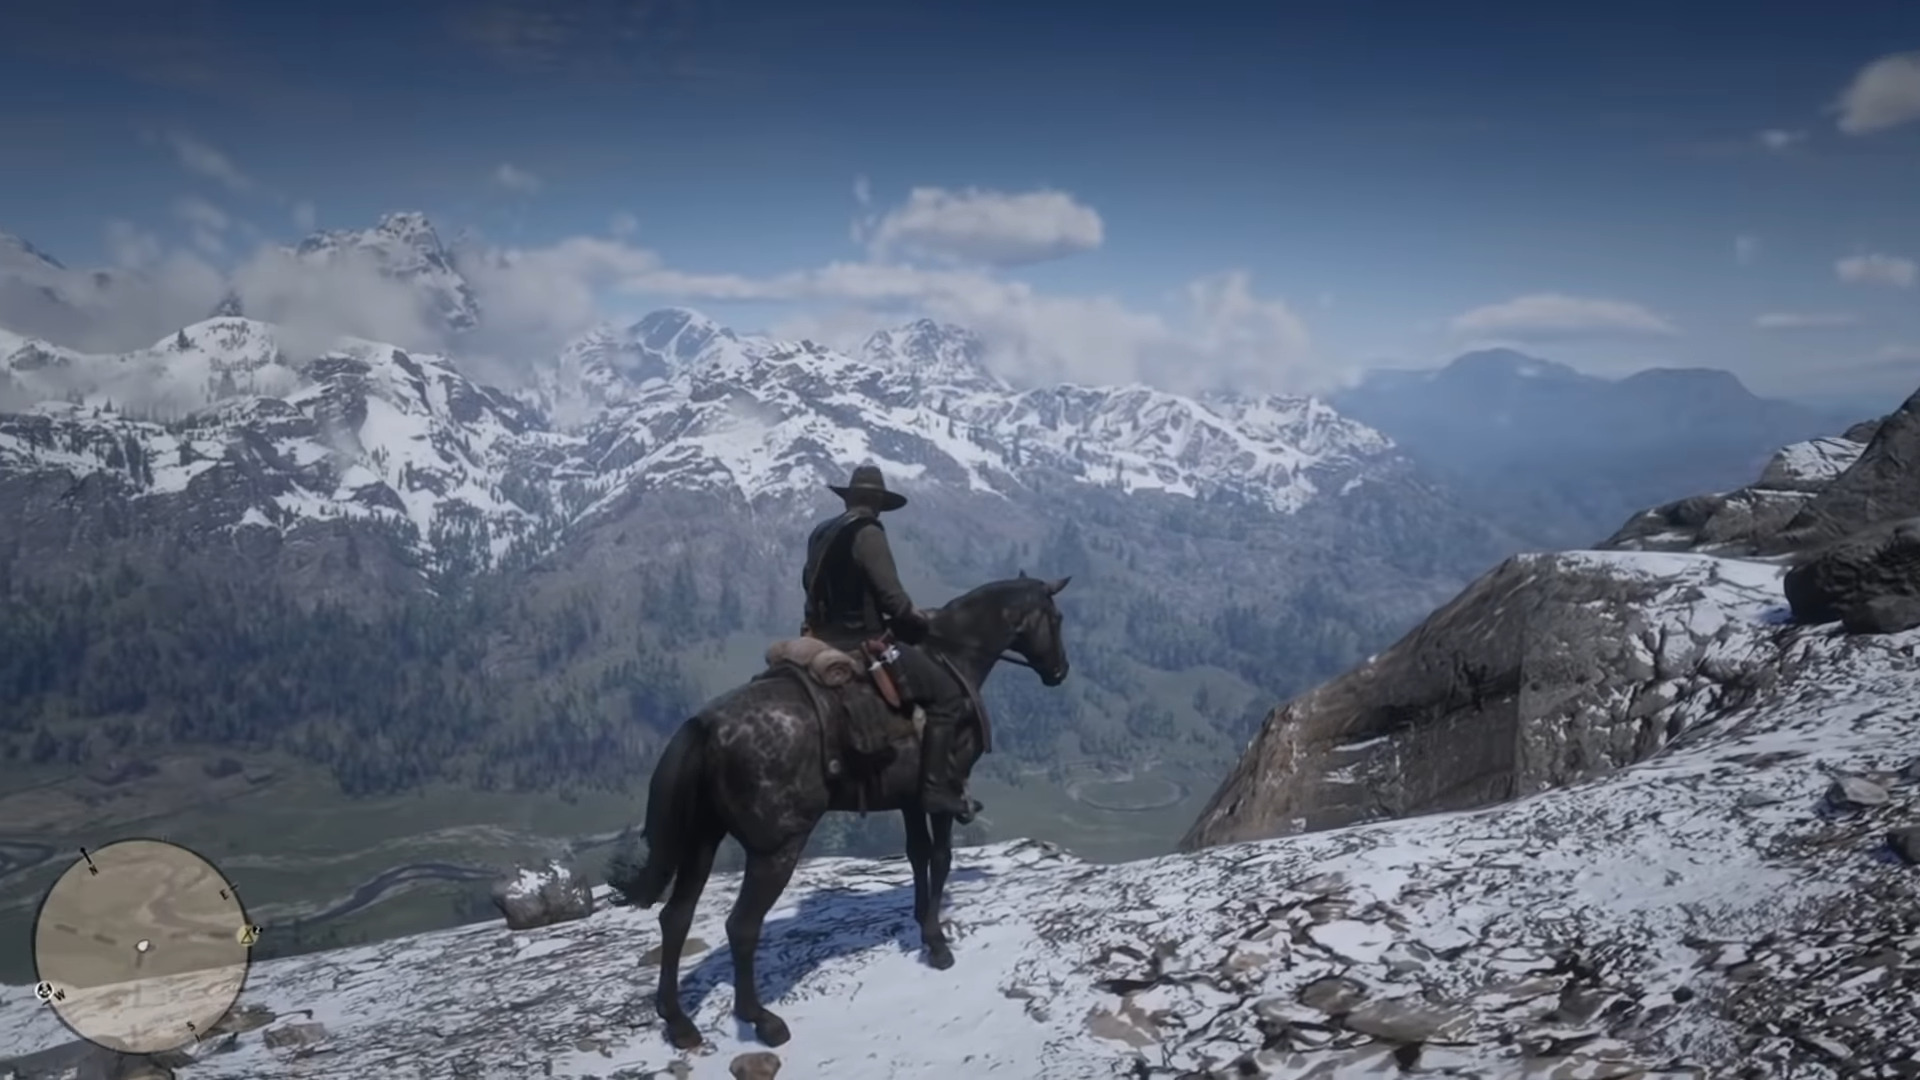 Red Dead Redemption 2: A Guide To Unlocking Fast Travel, RDR2’s Most Well-Kept Secret